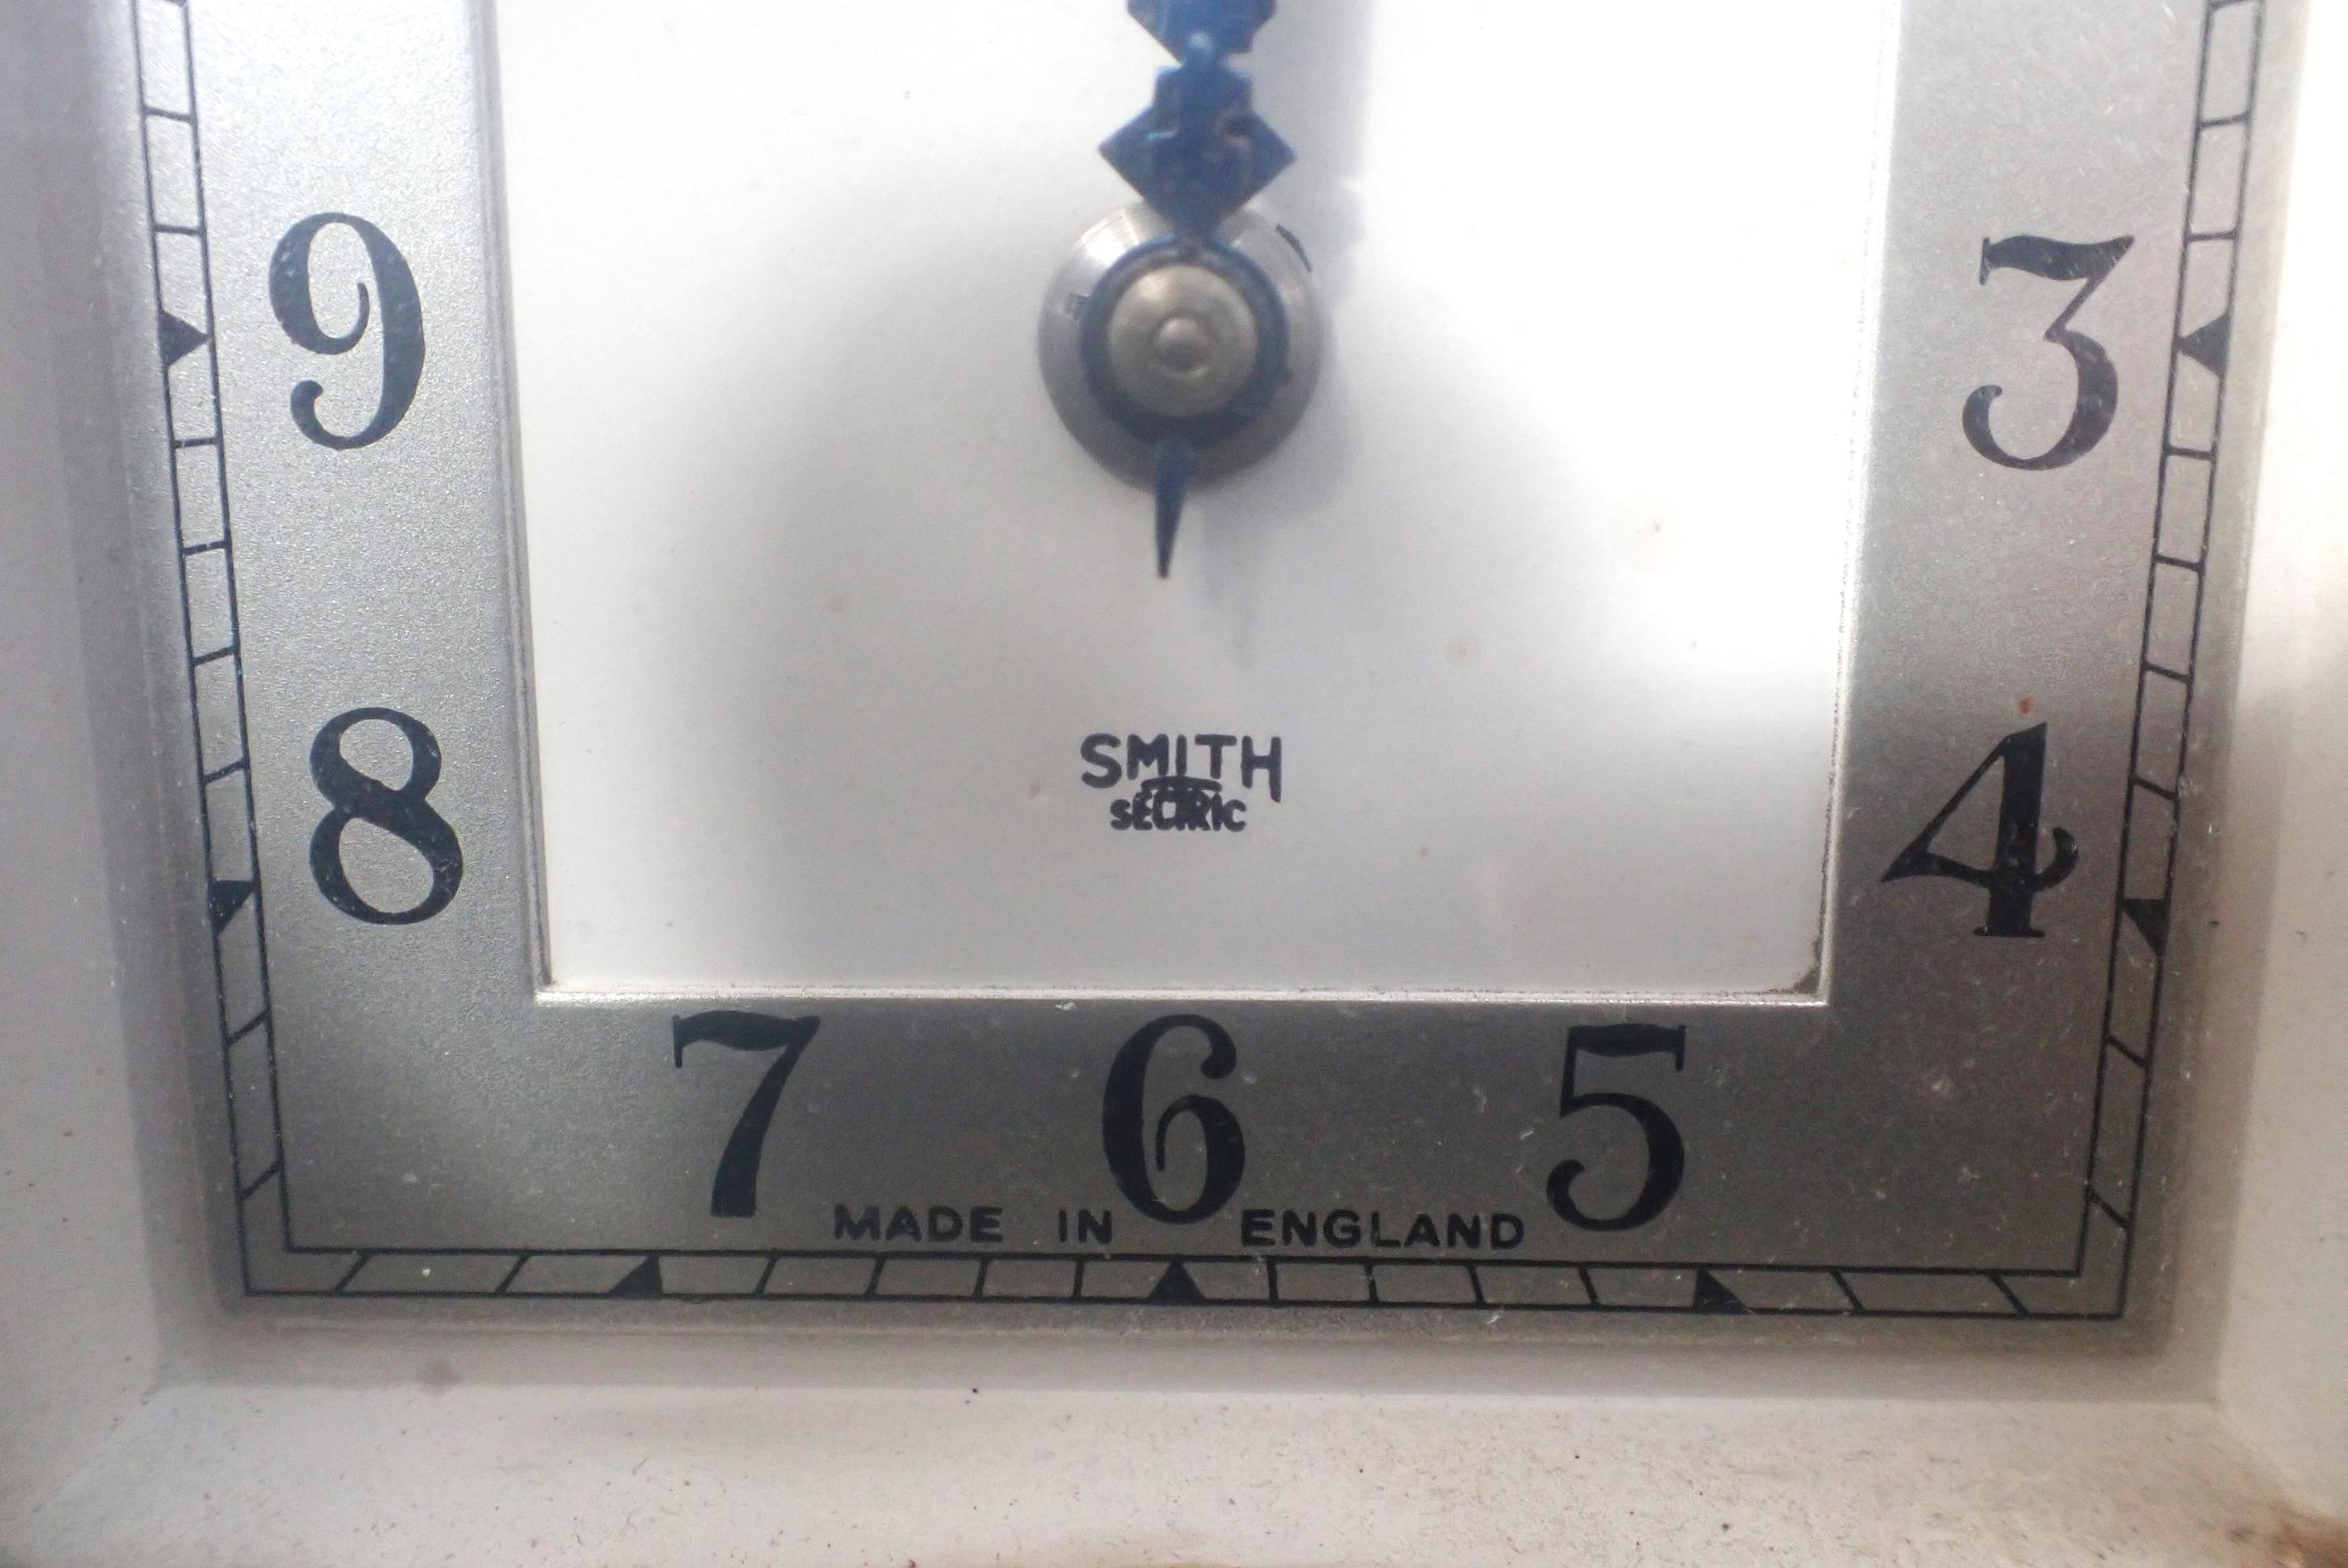 A SMITHS 'SECTRIC' ART DECO STYLE ELECTRIC CLOCK - Image 2 of 3